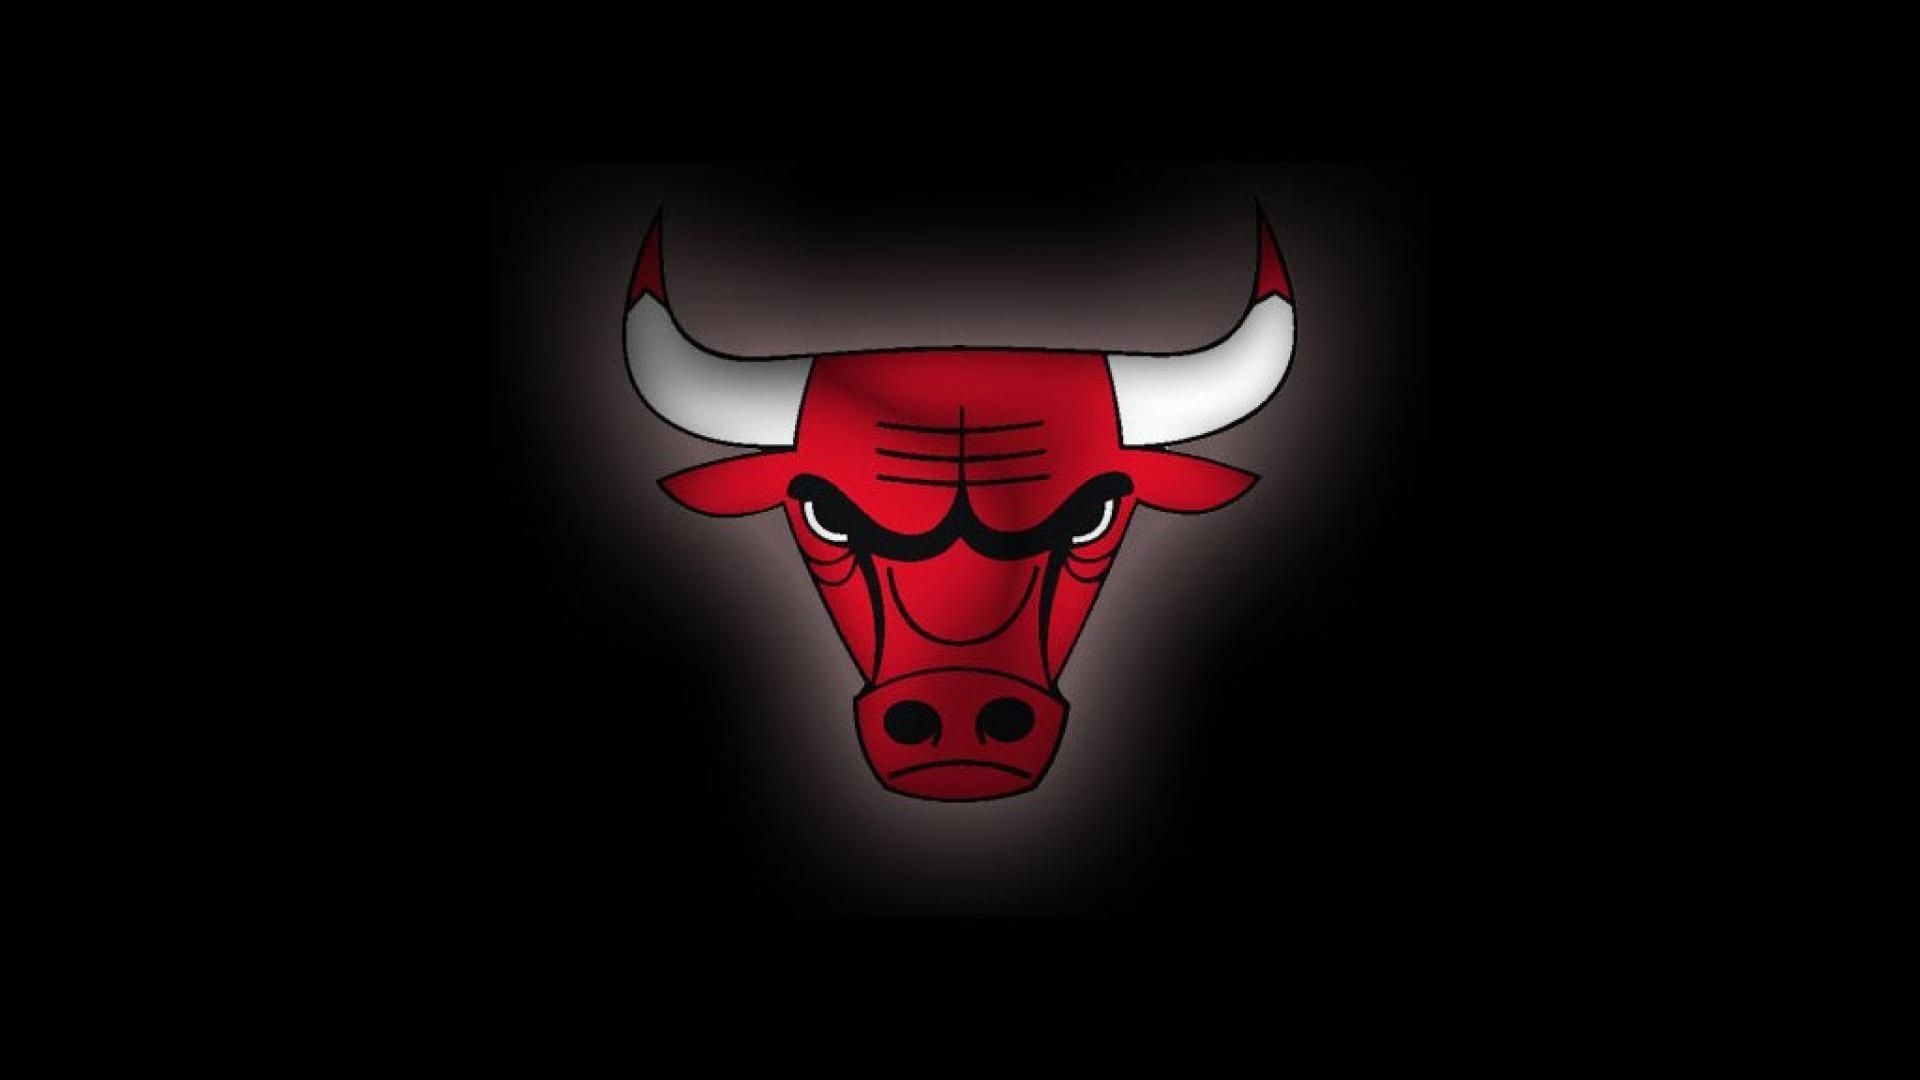 1920x1080 Chicago bulls basketball wallpapers - (#41524) - High Quality and .